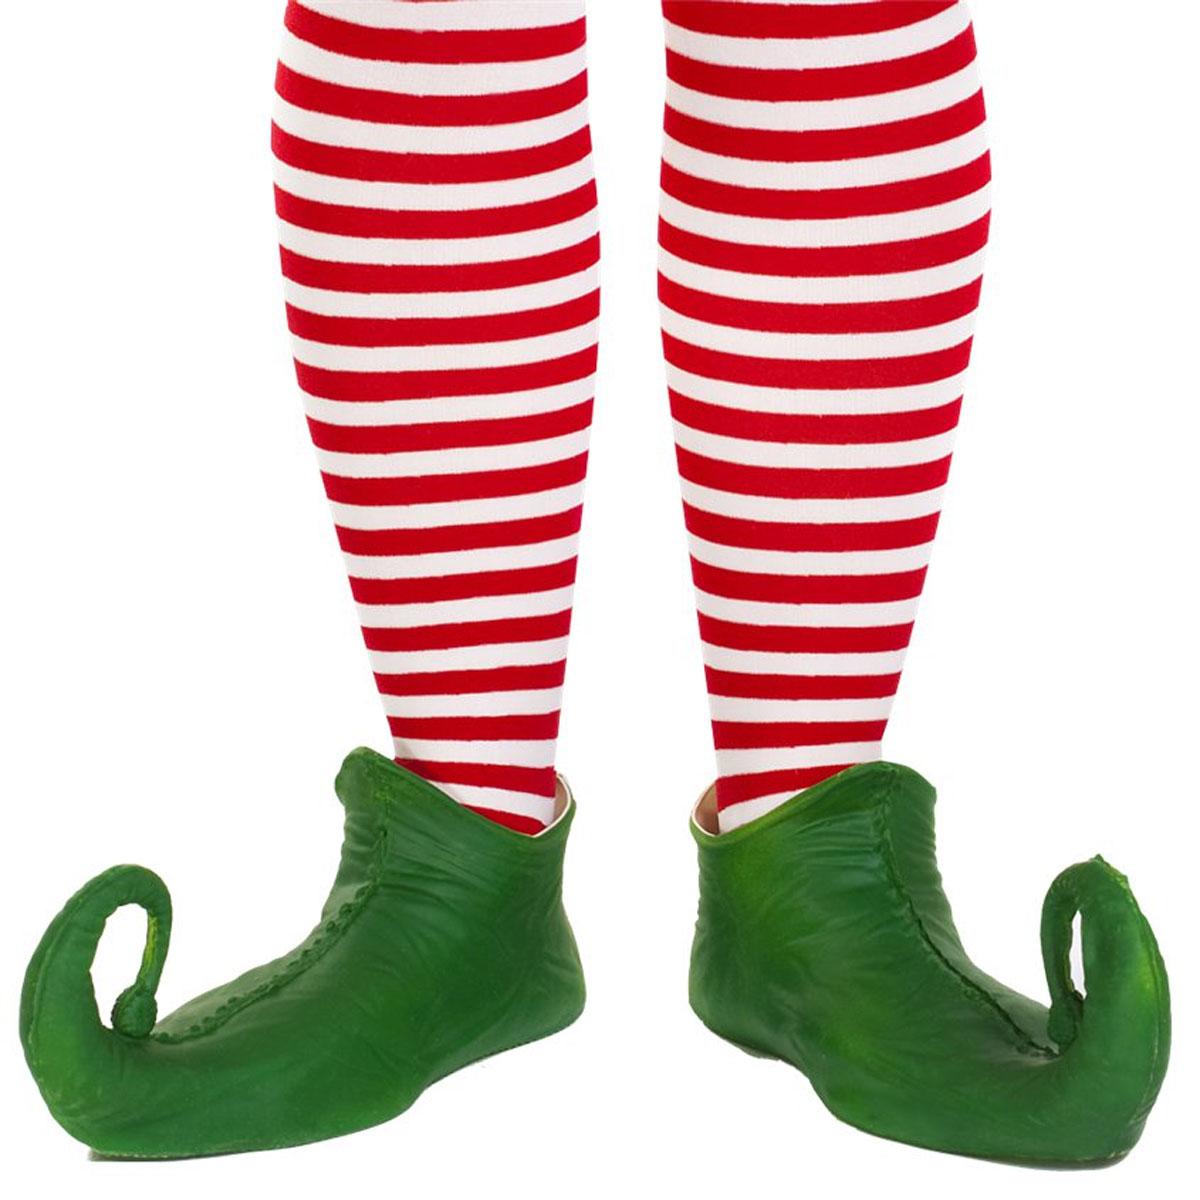 Red and White Striped Christmas Elf Socks for Adults by Guirca 16370 available here at Karnival Costumes online party shop